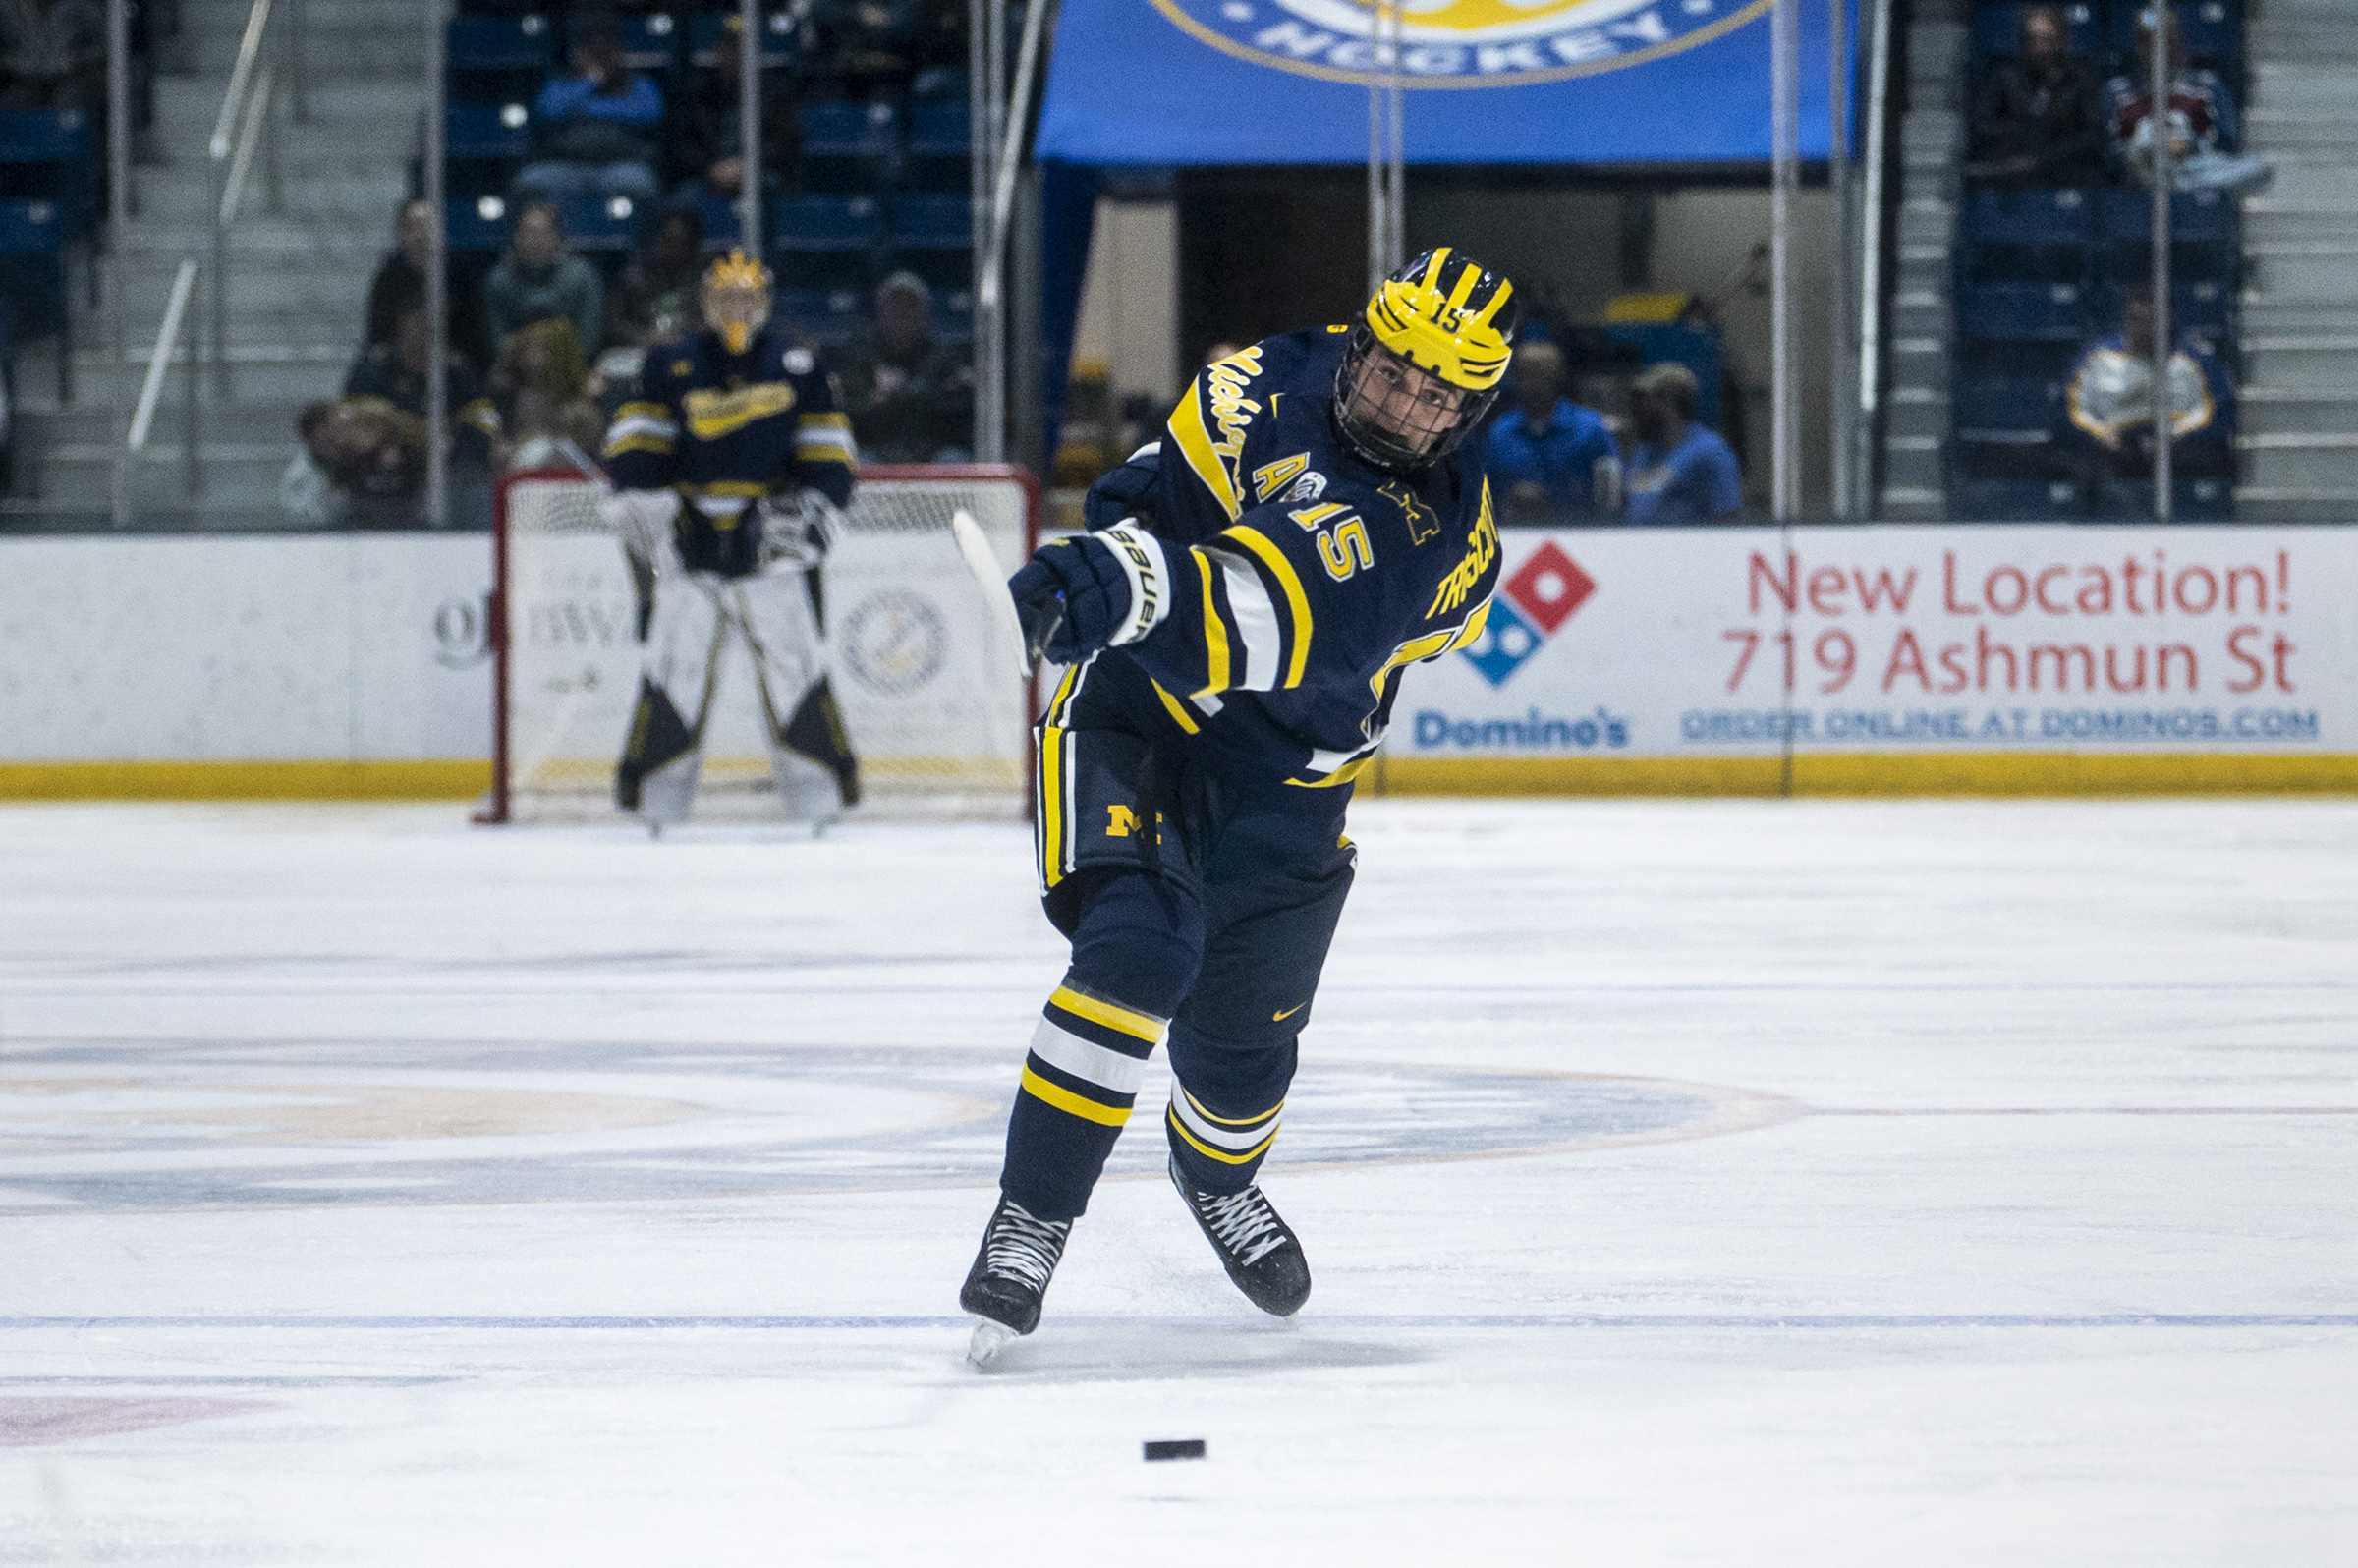 Truscotts do-it-all play boosts Michigan hockey to victory